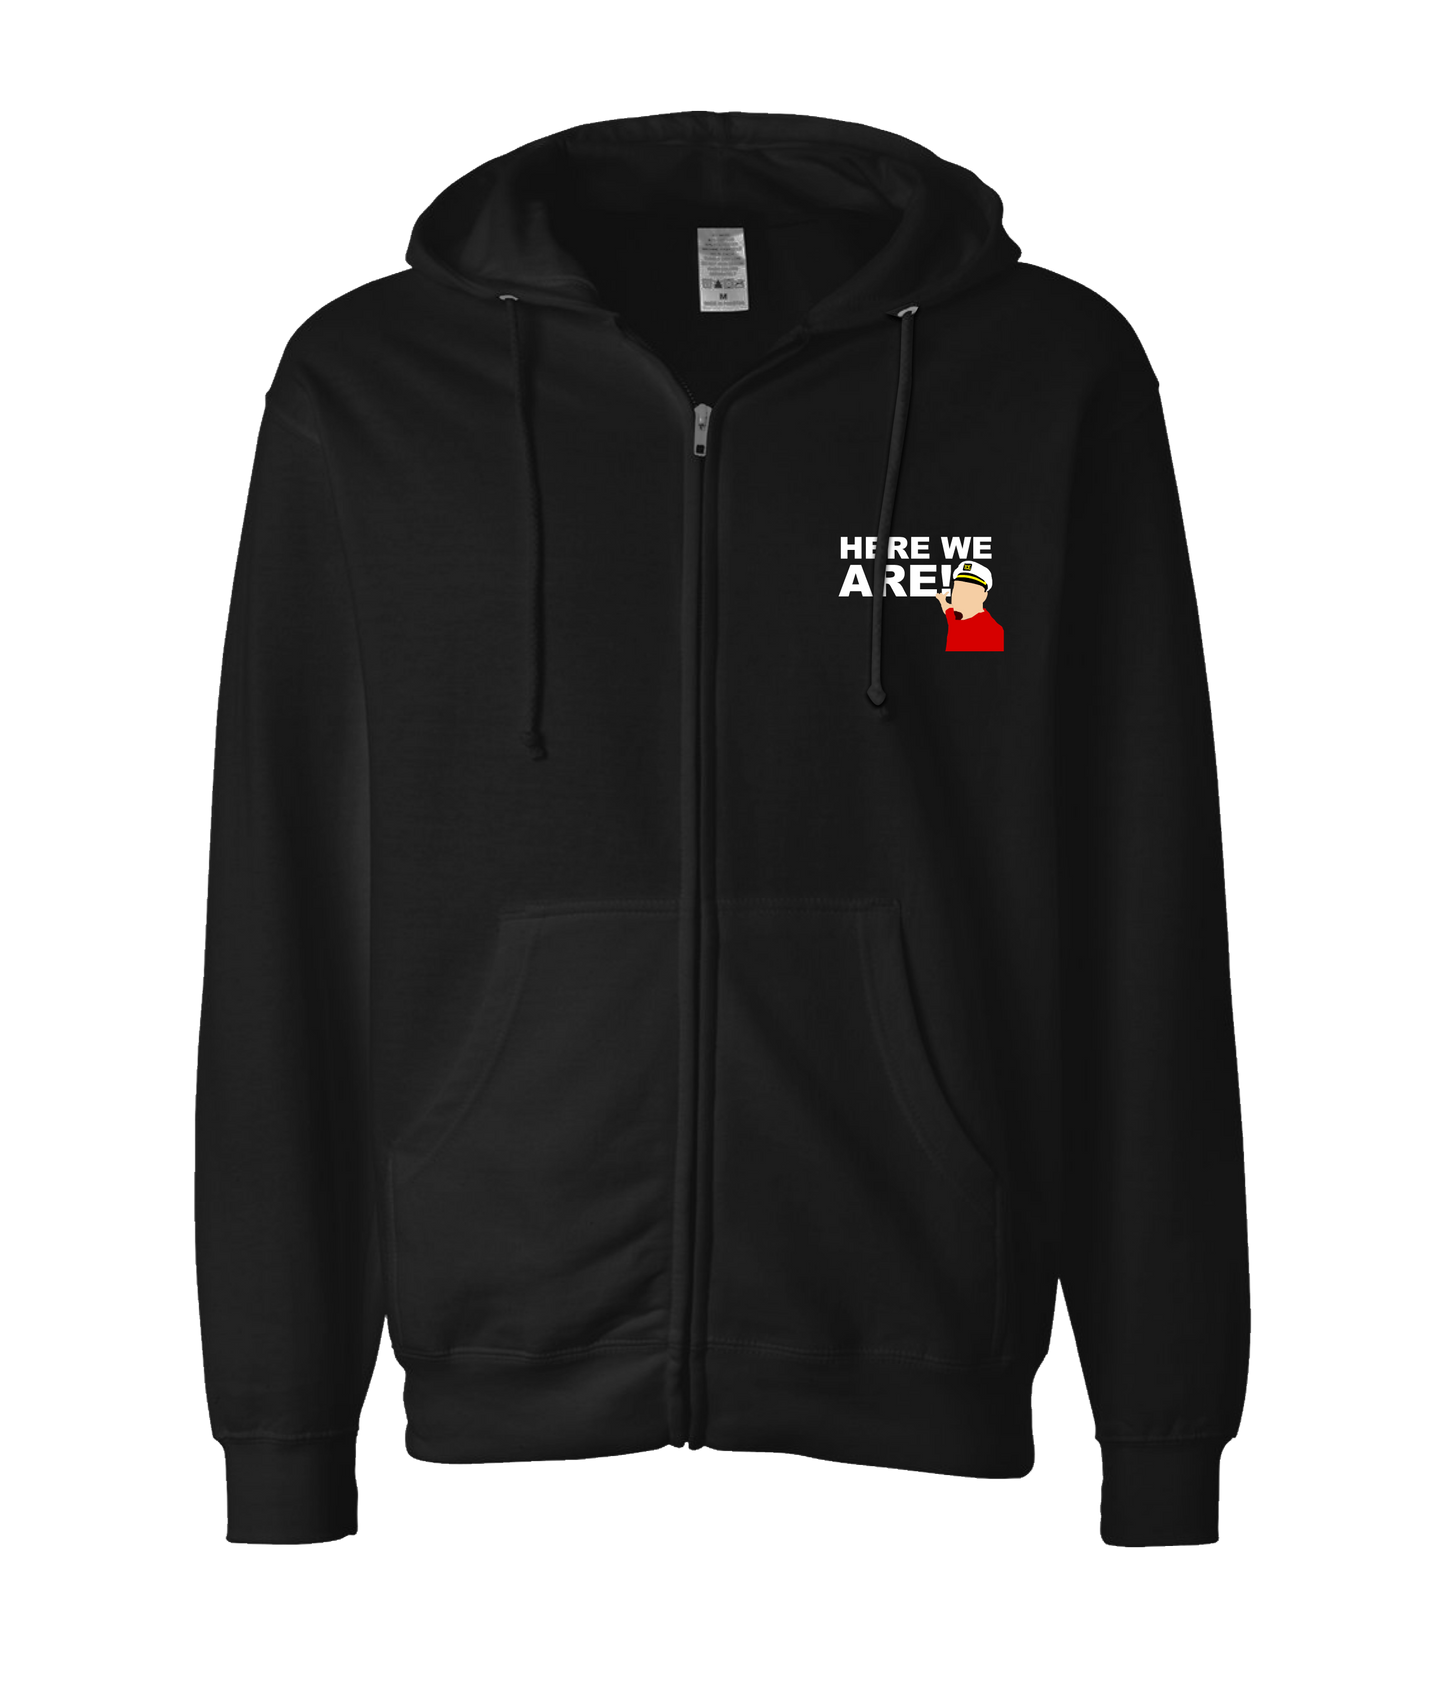 The Philly Captain's Merch is Fire - Here We Are - Black Zip Up Hoodie